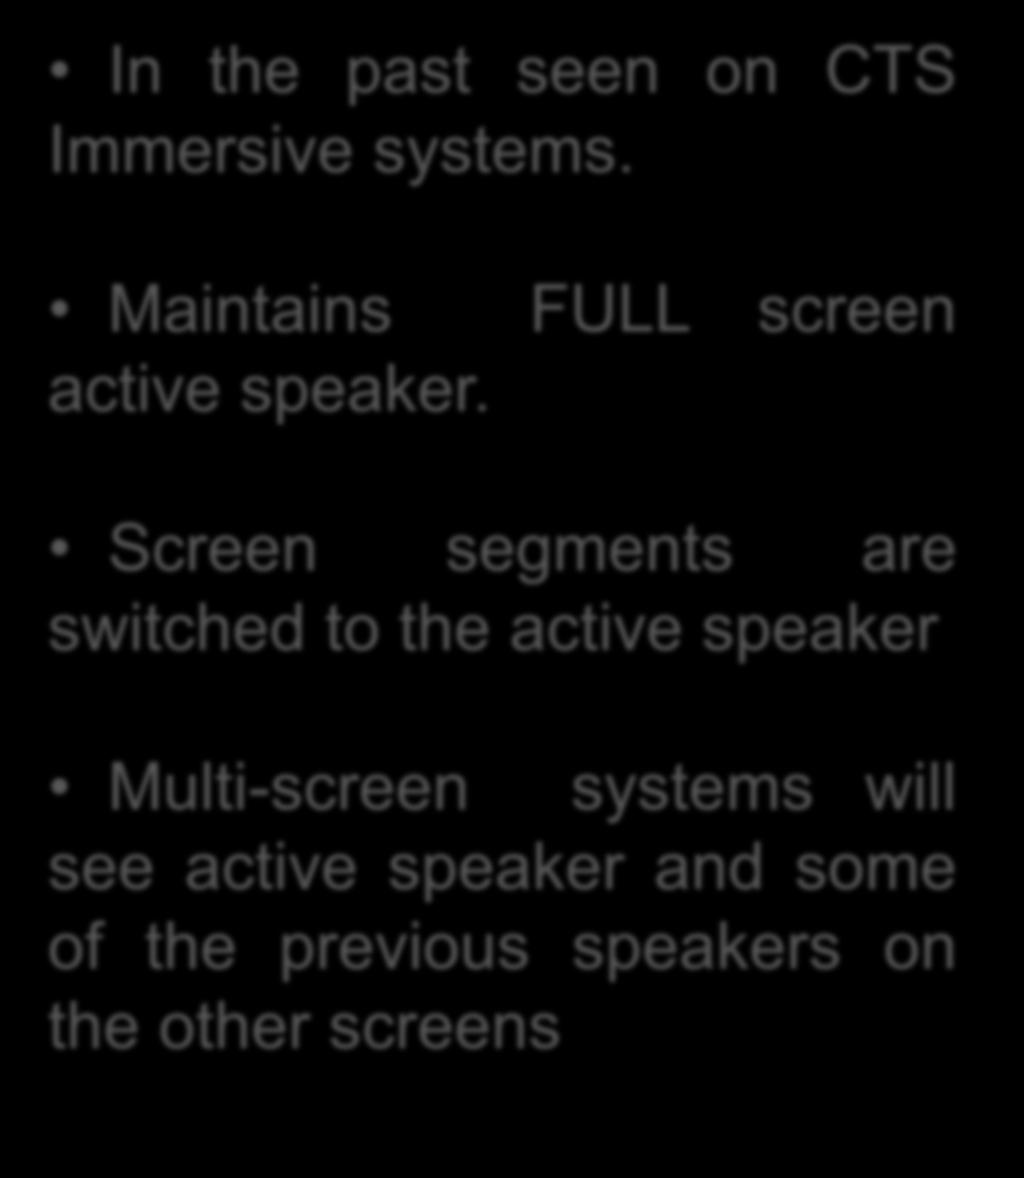 Screen segments are switched to the active speaker